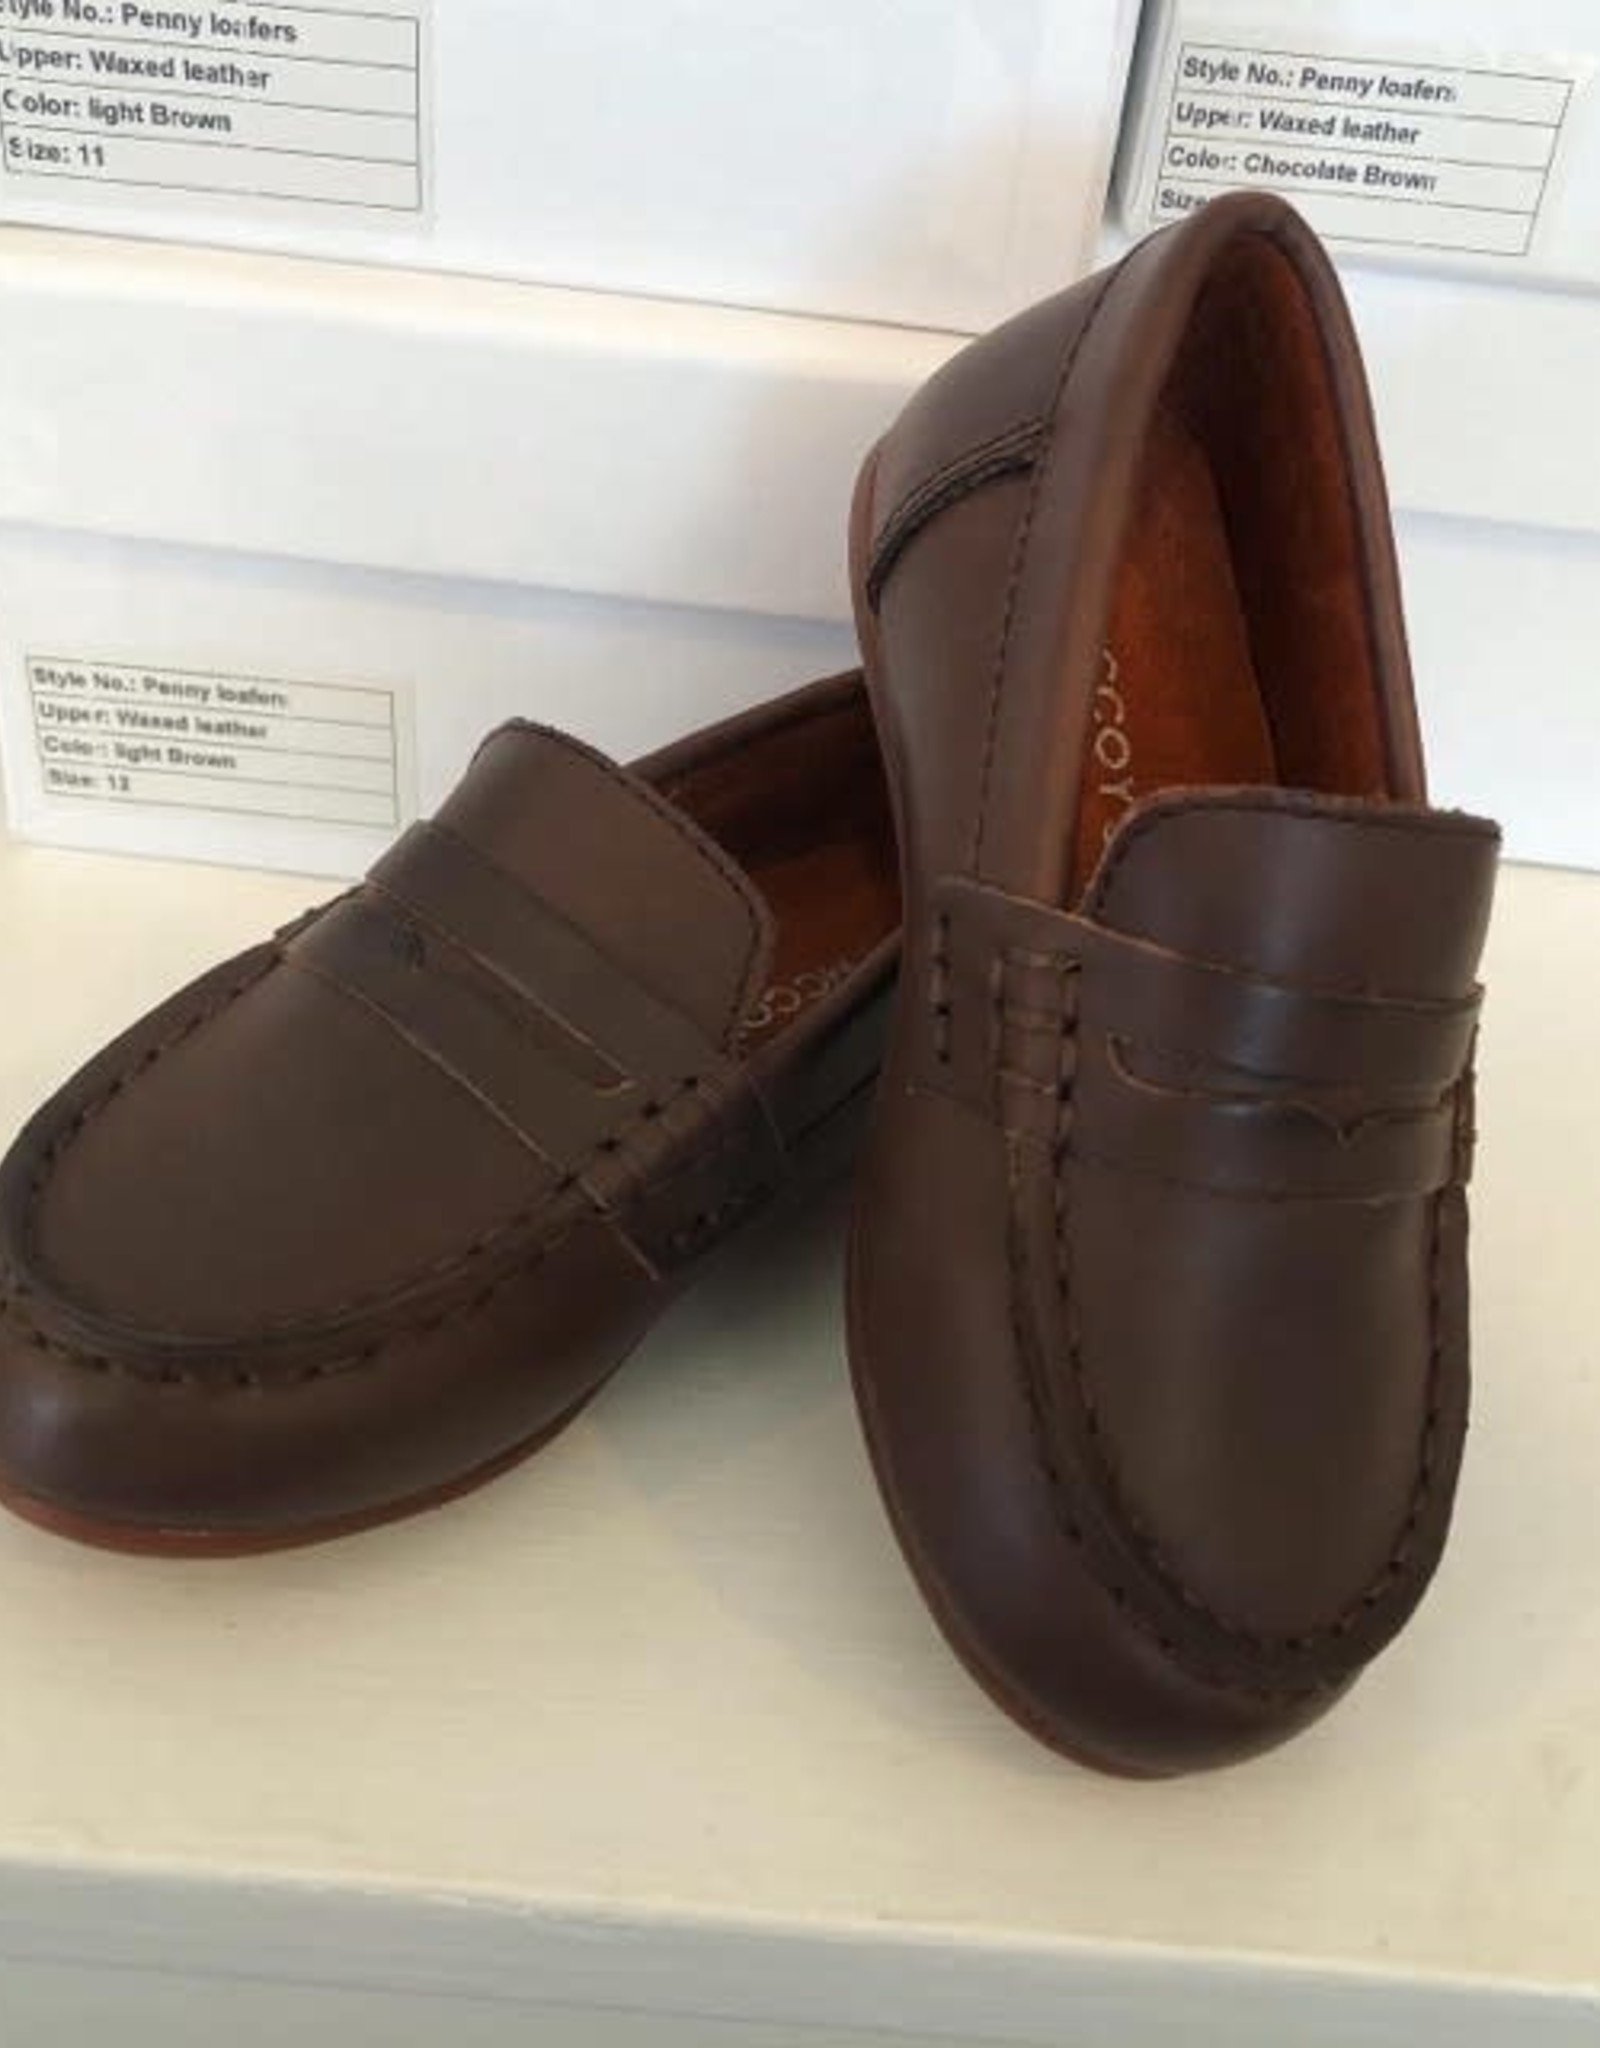 McCoy's Boys Penny Loafer in Chocolate